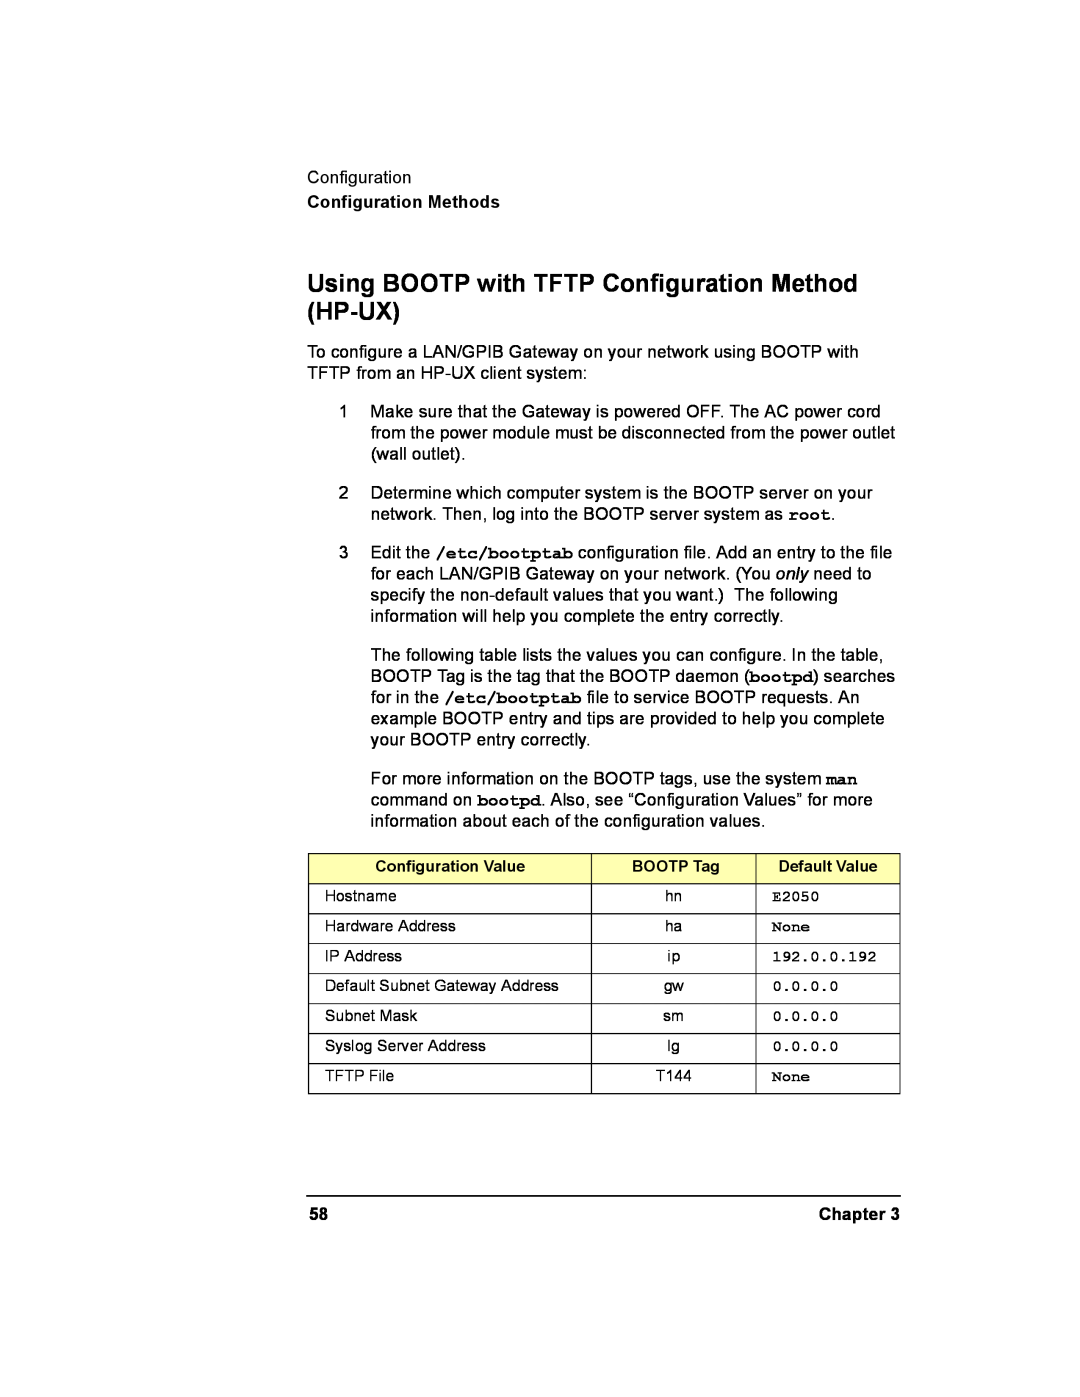 Agilent Technologies E2050-90003 manual Using BOOTP with TFTP Configuration Method HP-UX, Configuration Methods, Chapter 